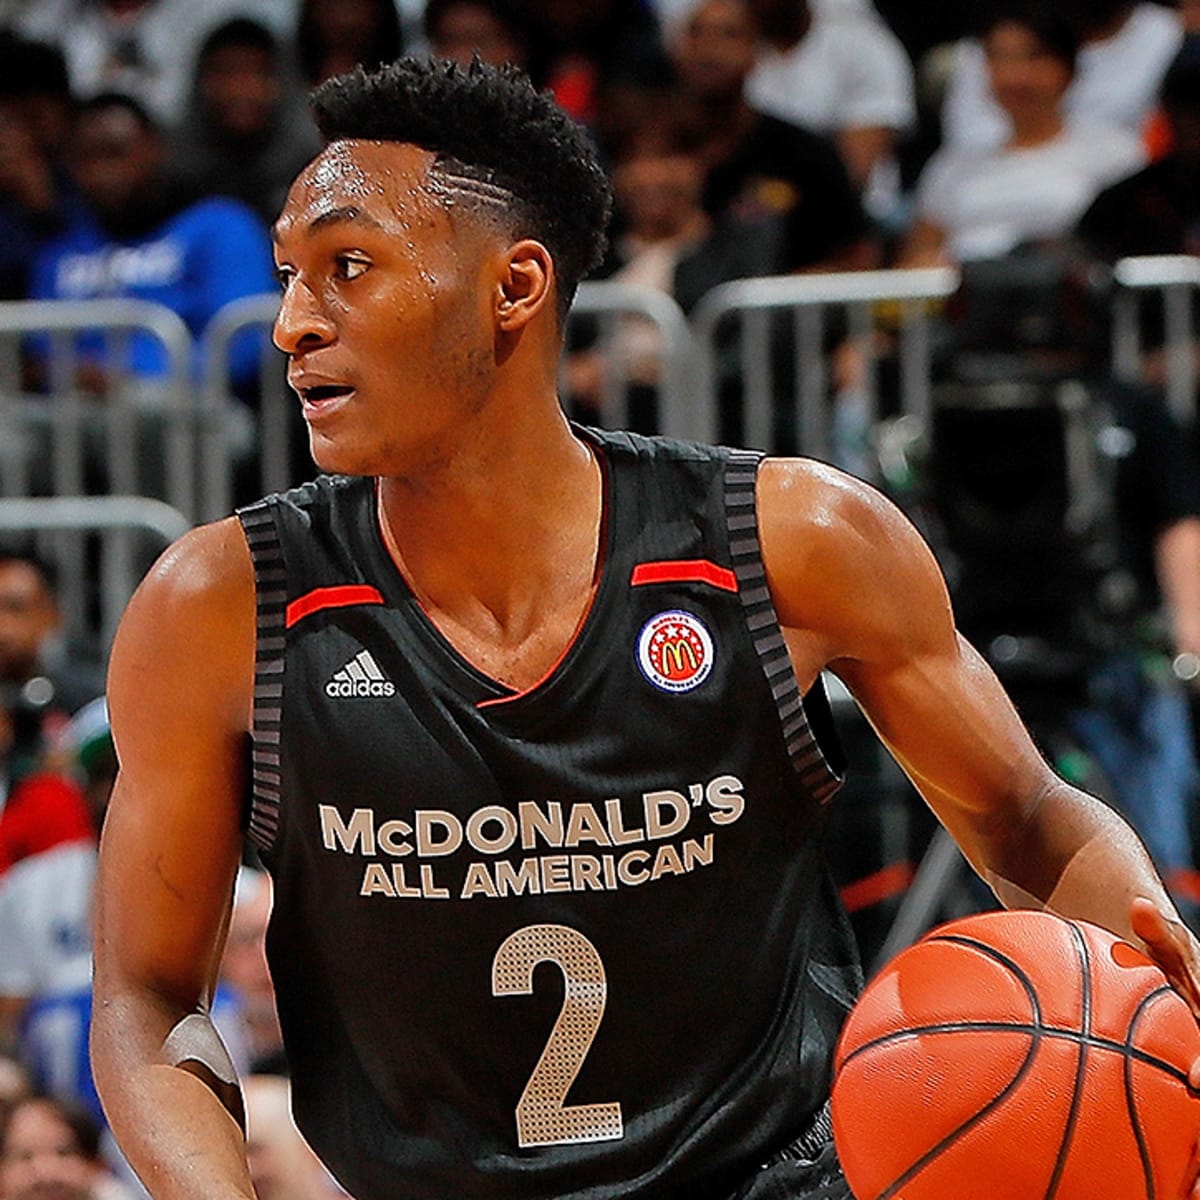 College Basketball 2017: Immanuel Quickley to sign with Kentucky